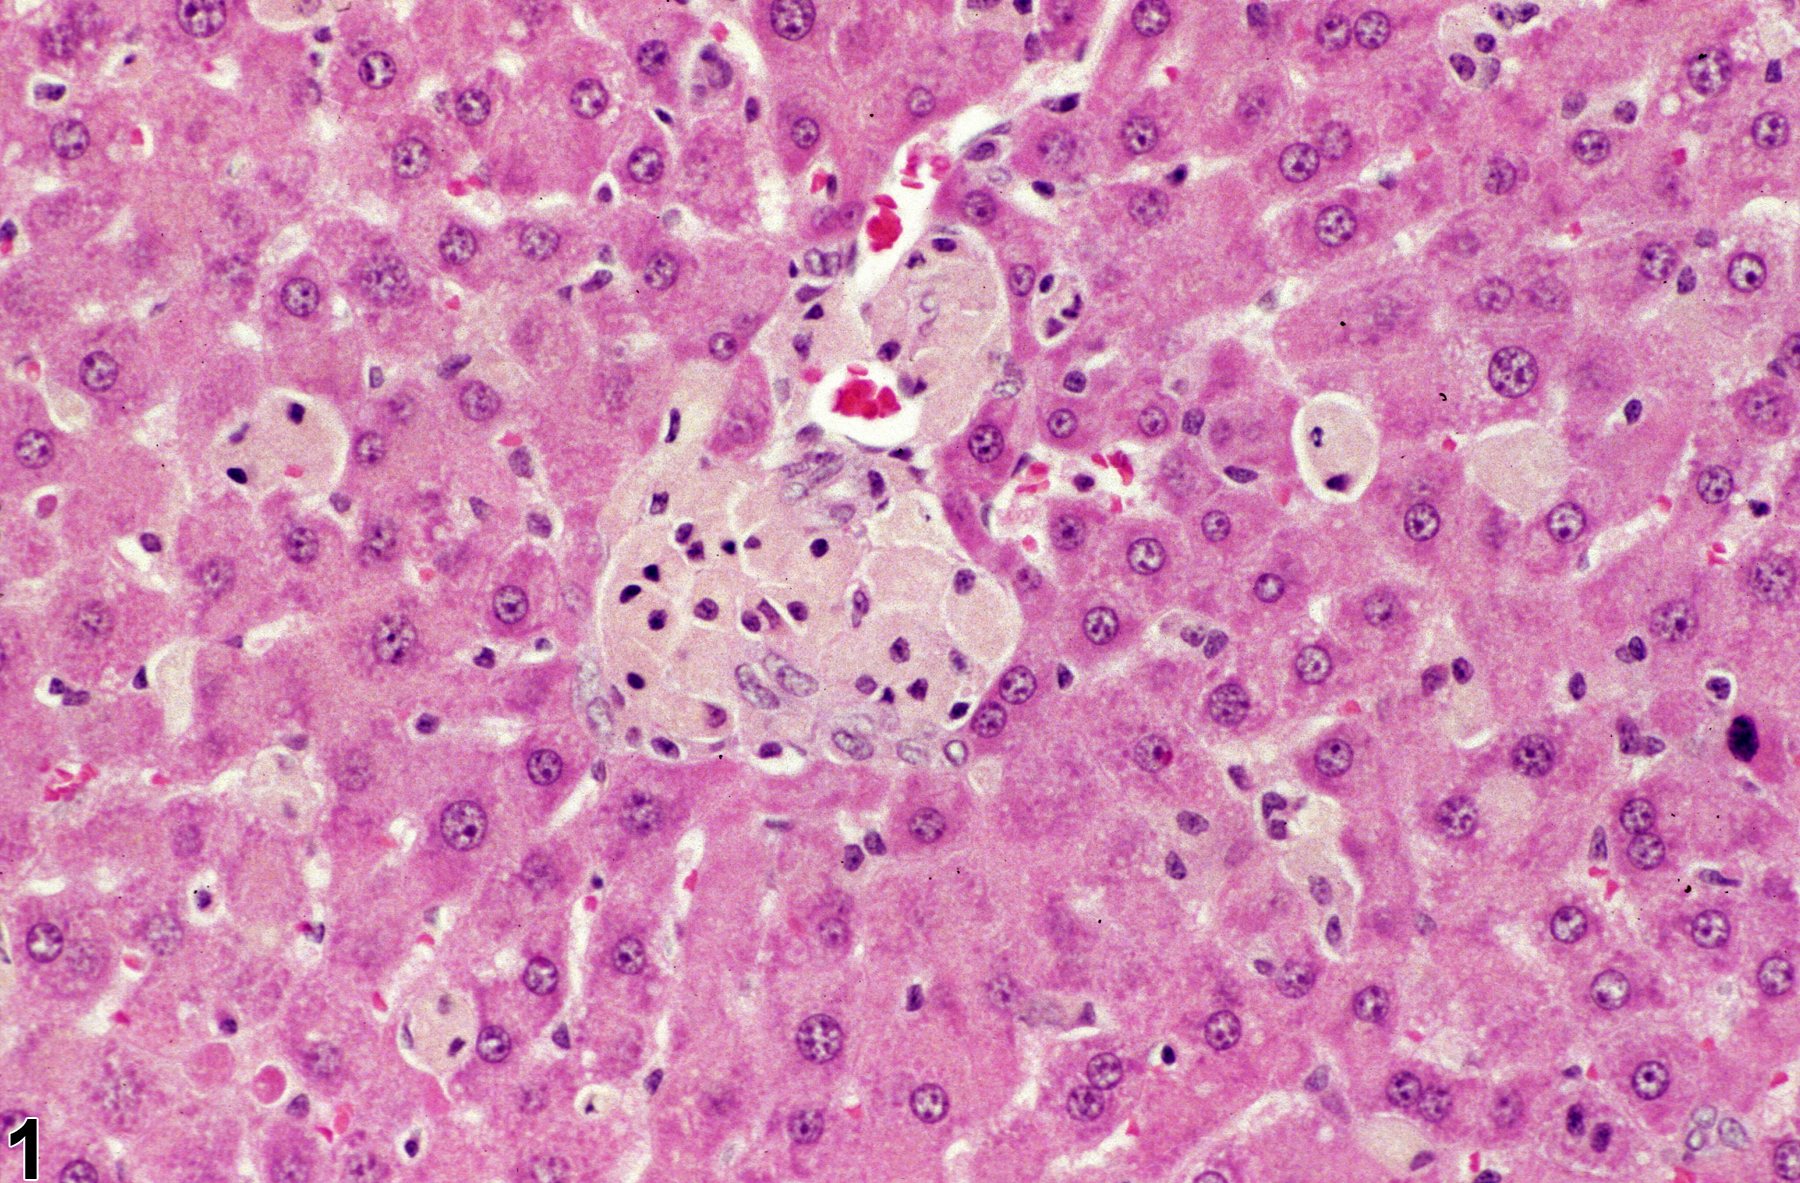 Image of Kupffer cell hyperplasia in the liver from a female F344/N rat in a subchronic study